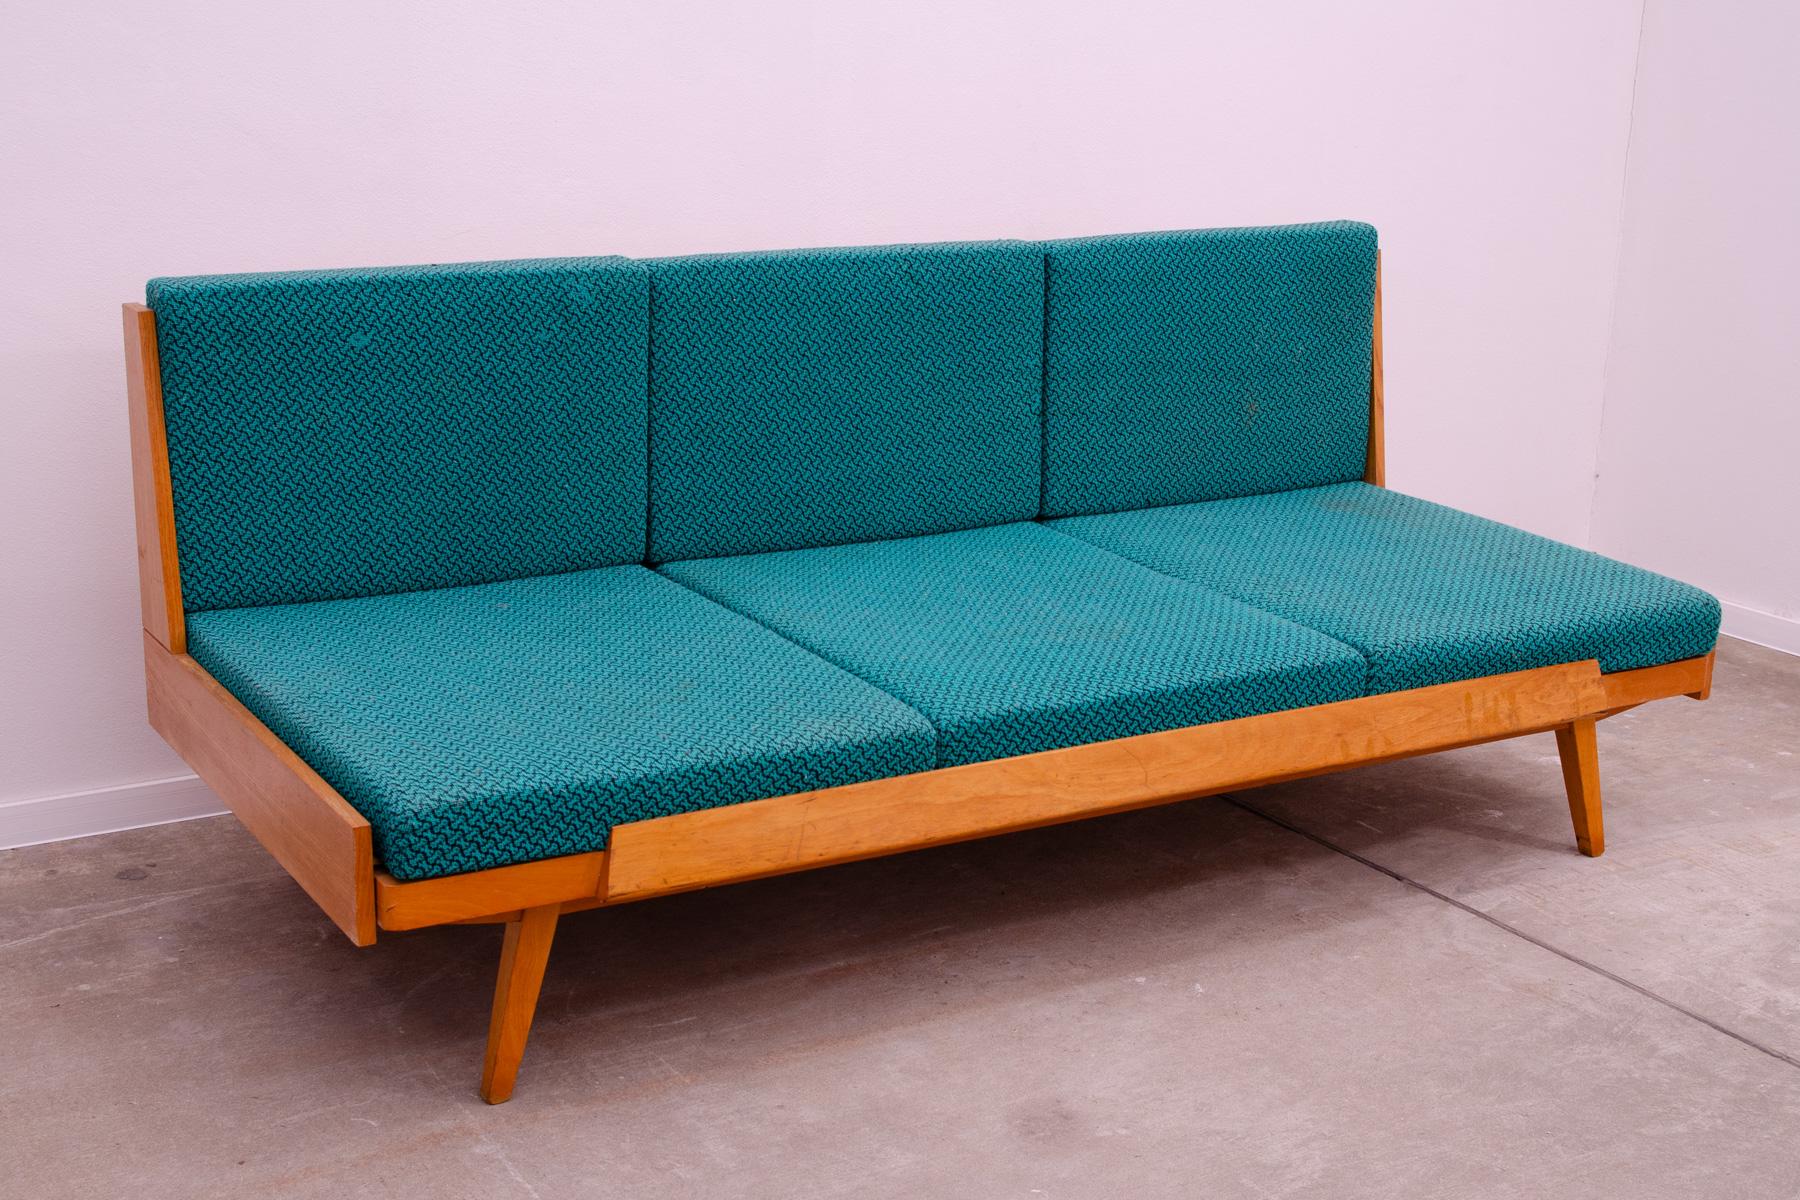 Mid century sofa bed,made in the former Czechoslovakia in the 1970´s. The sofa has a beechwood structure, it´s in good preserved Vintage condition, showing signs of age and using(as you can see in the photos).

Lenght:     199 cm

Height:     82